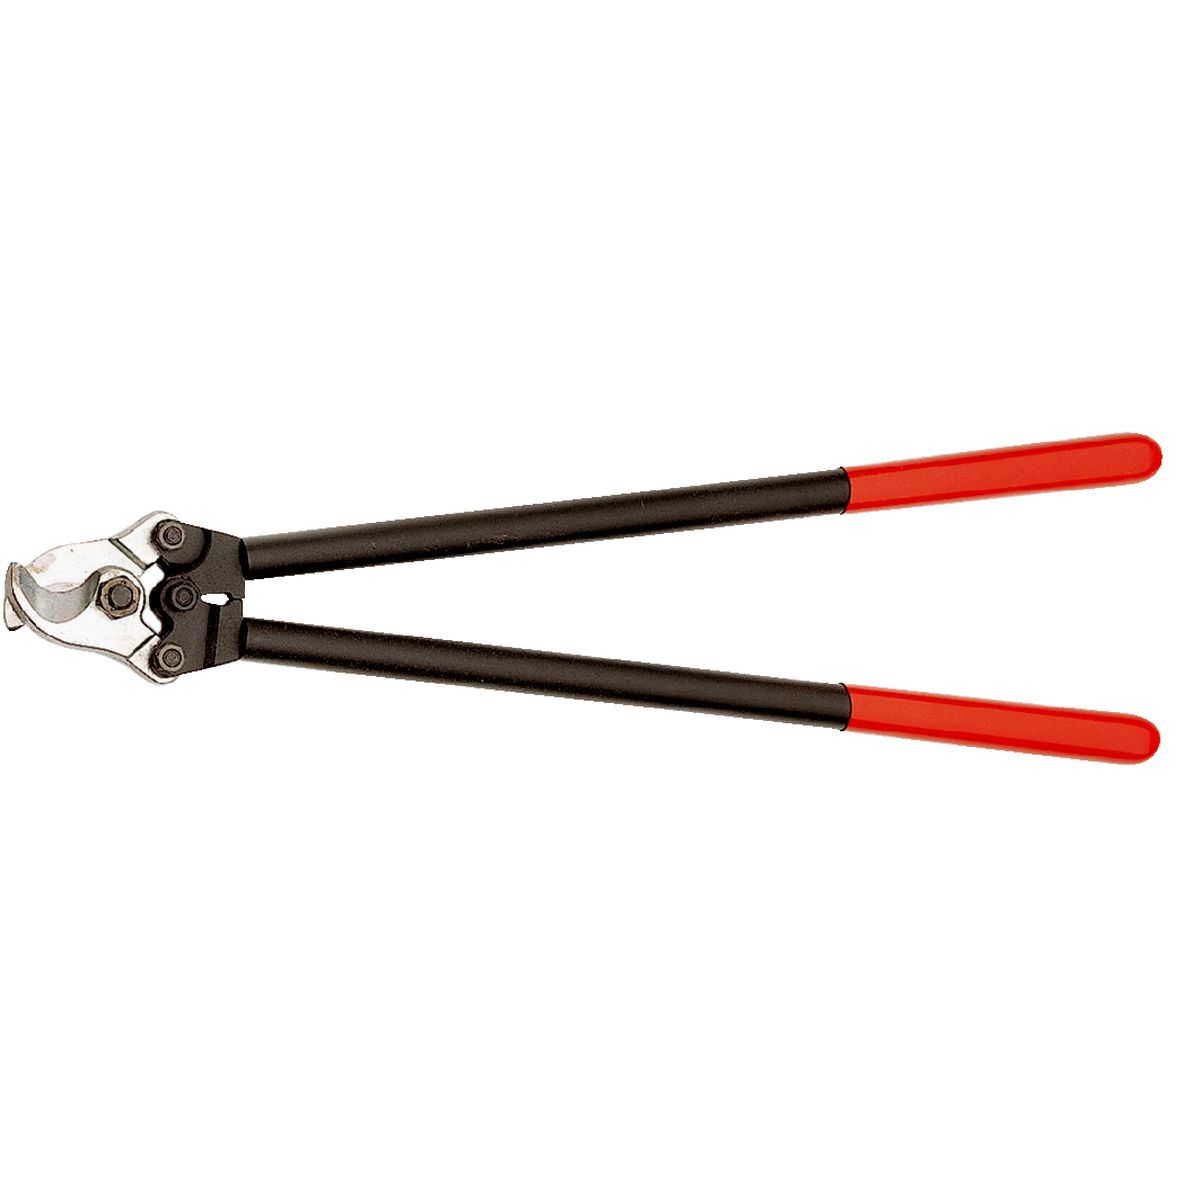 CABLE SHEARS 9521600 Knipex